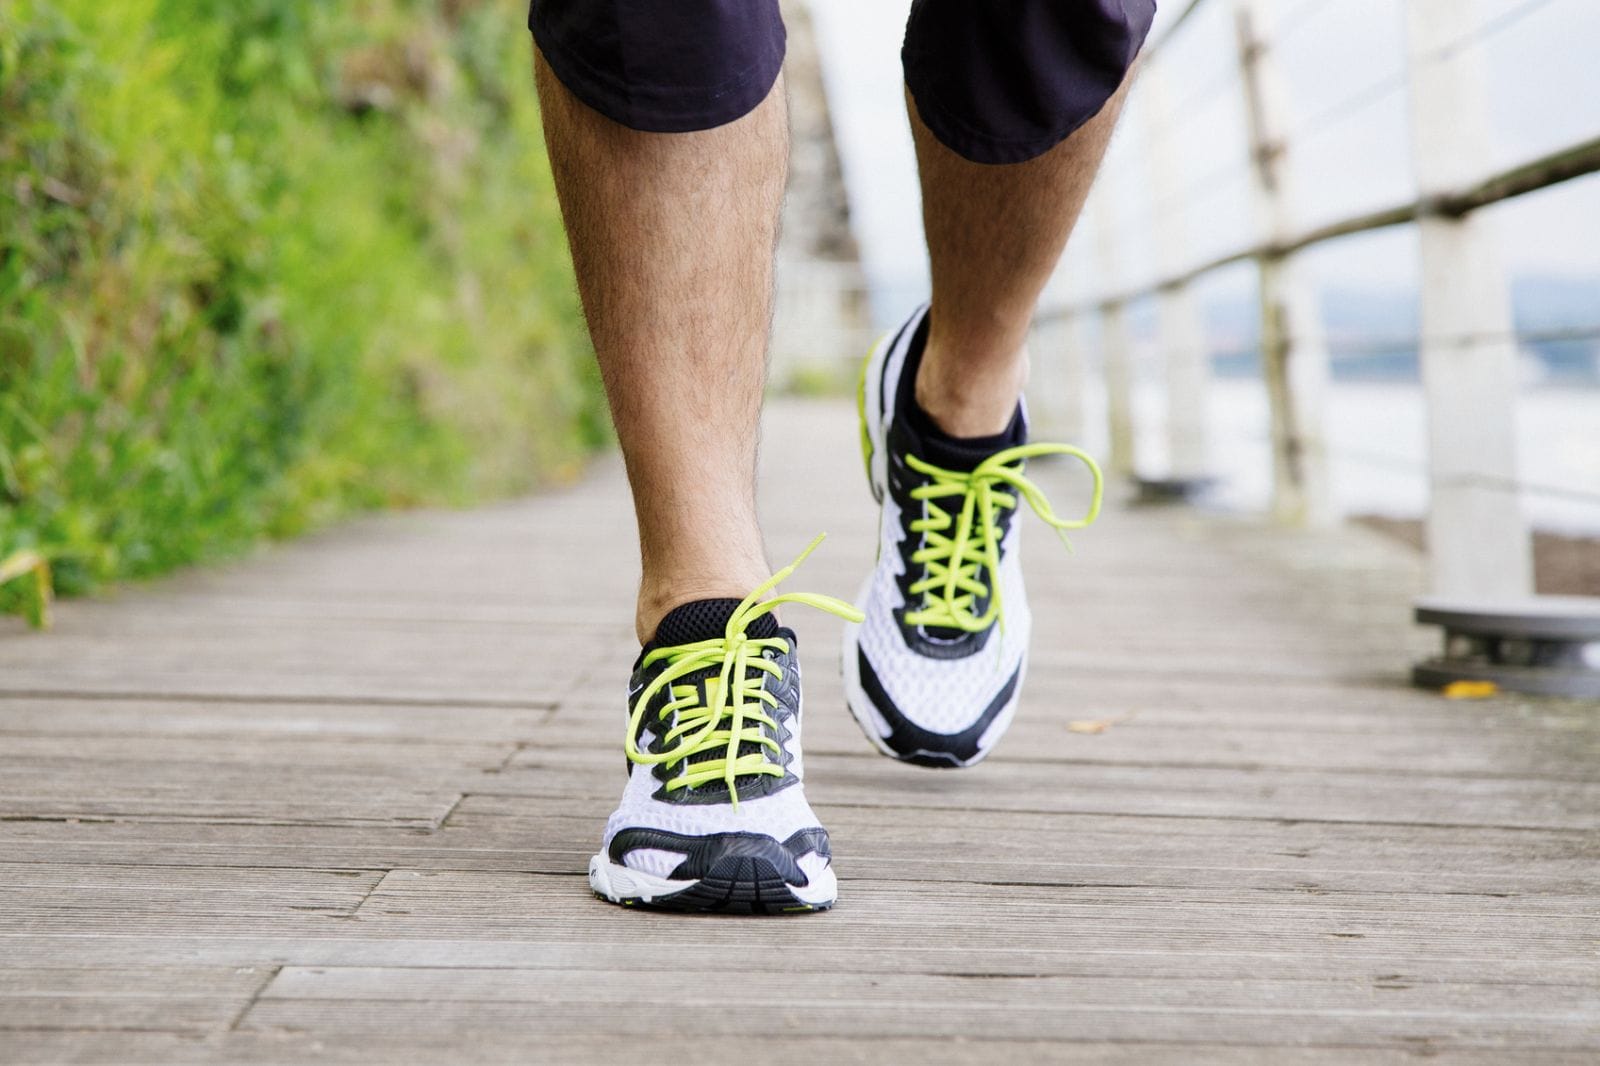 3 Strategies for Healthy Feet for the New Year!